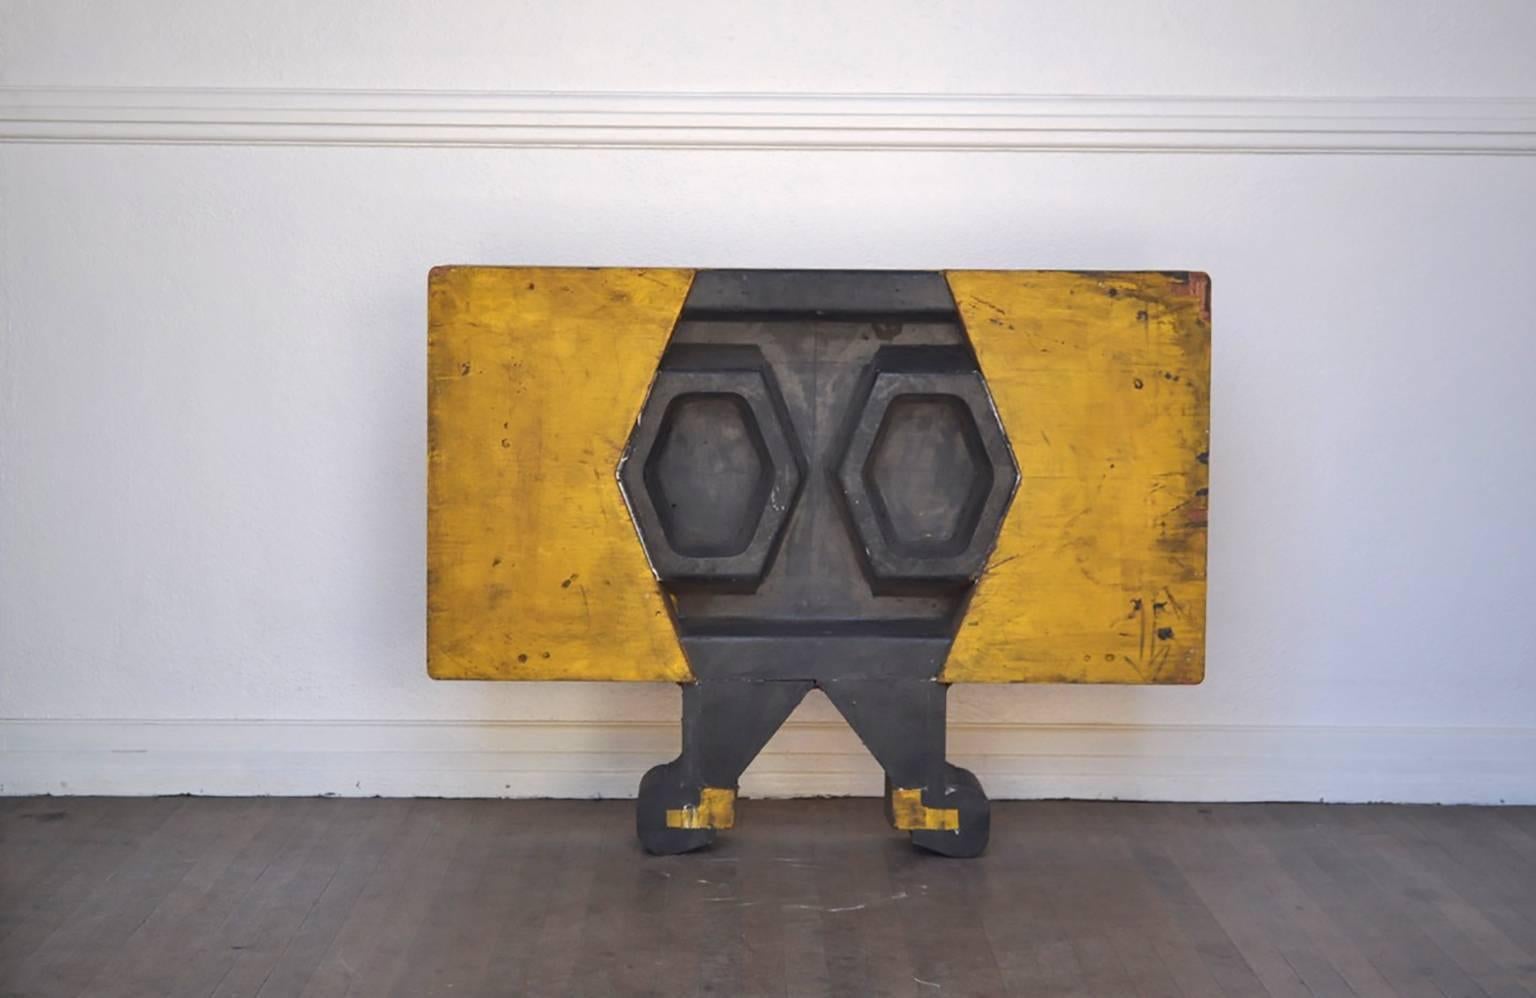 Industrial mold of unknown use functions as a tabletop, floor or wall-mounted sculpture.